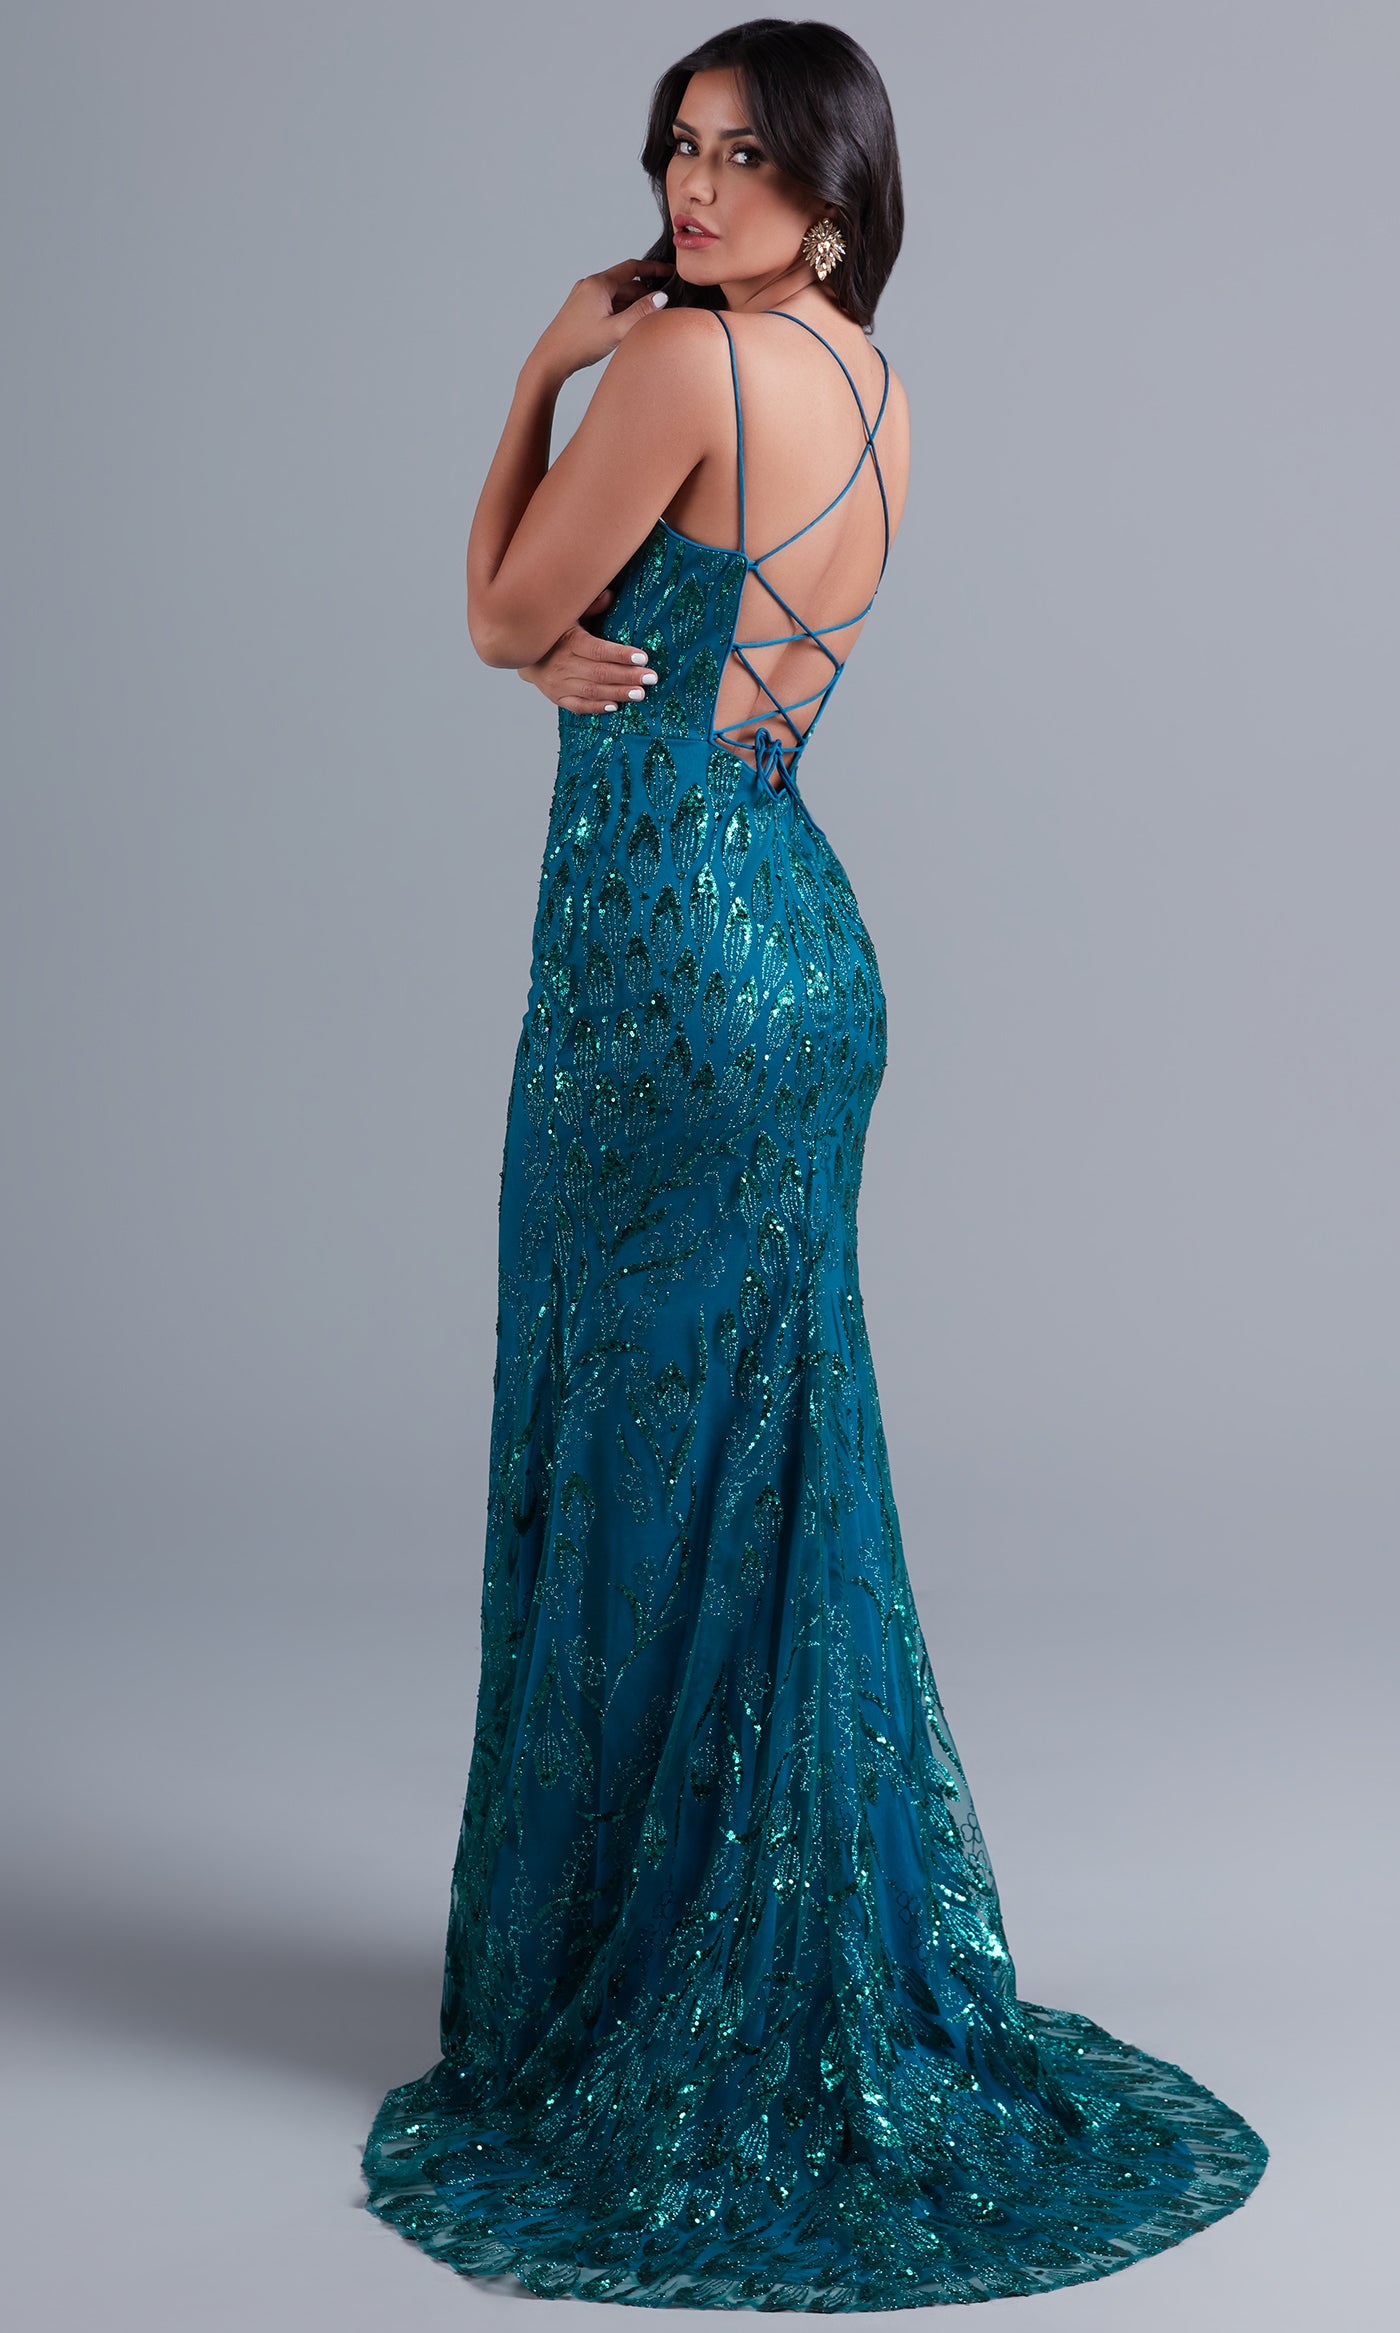  Sequin-Tulle Strappy-Back Long Formal Dress